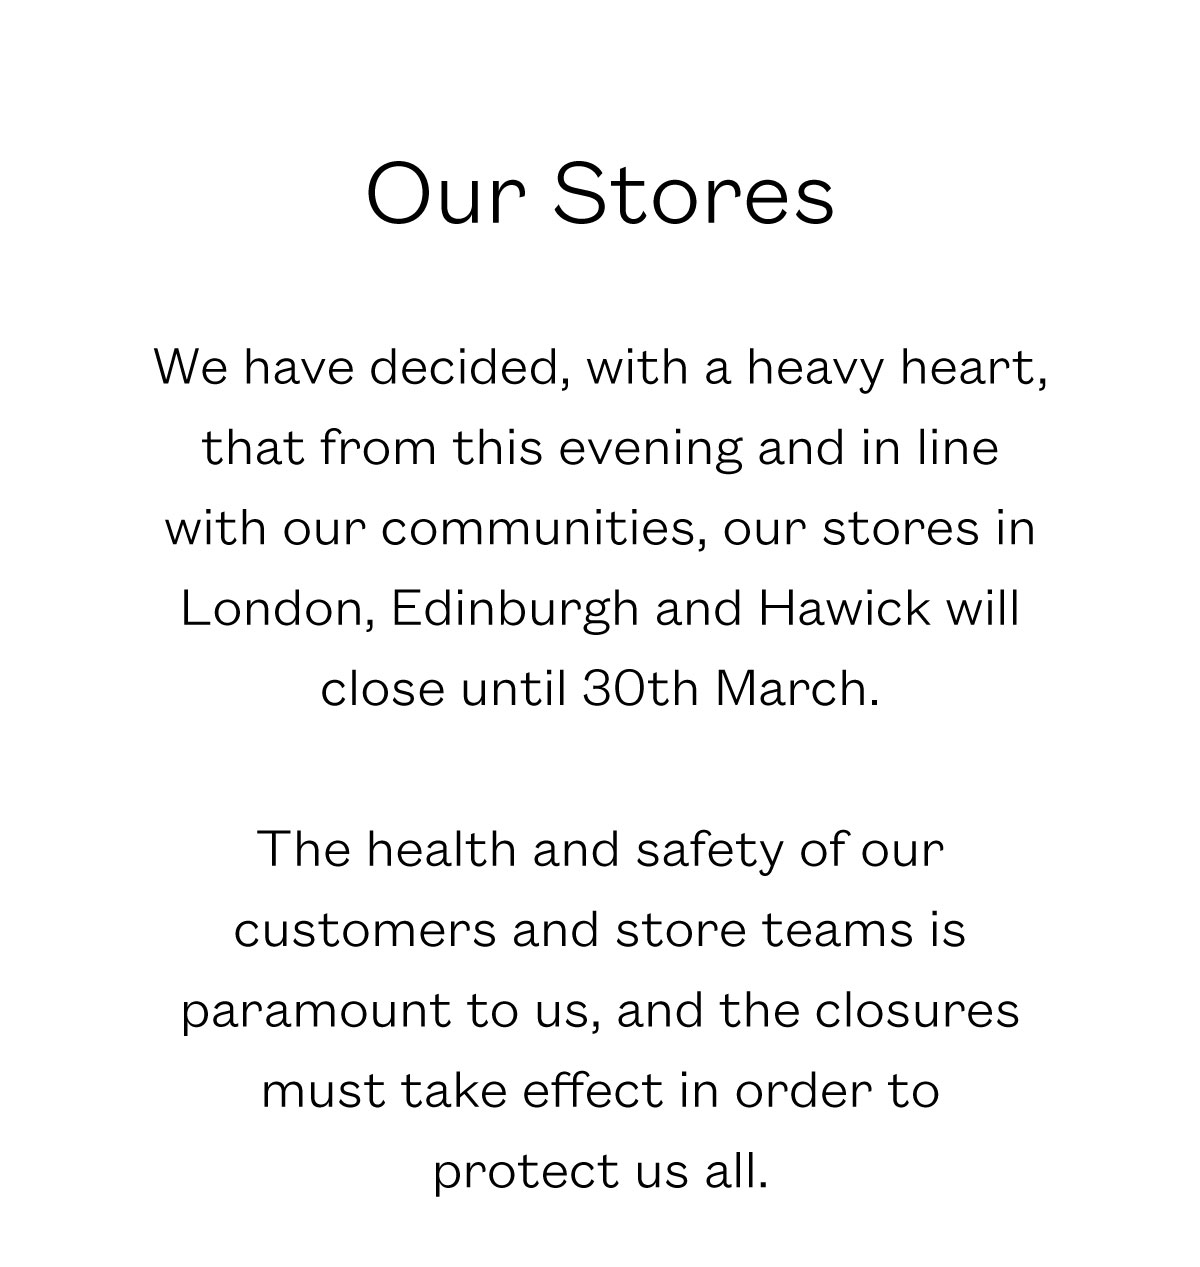 Our Stores  We have decided, with a heavy heart, that from this evening and in line with our communities, our stores in London, Edinburgh and Hawick will close until 30th March.  The health and safety of our customers and store teams is paramount to us, and the closures must take effect in order to  protect us all. 